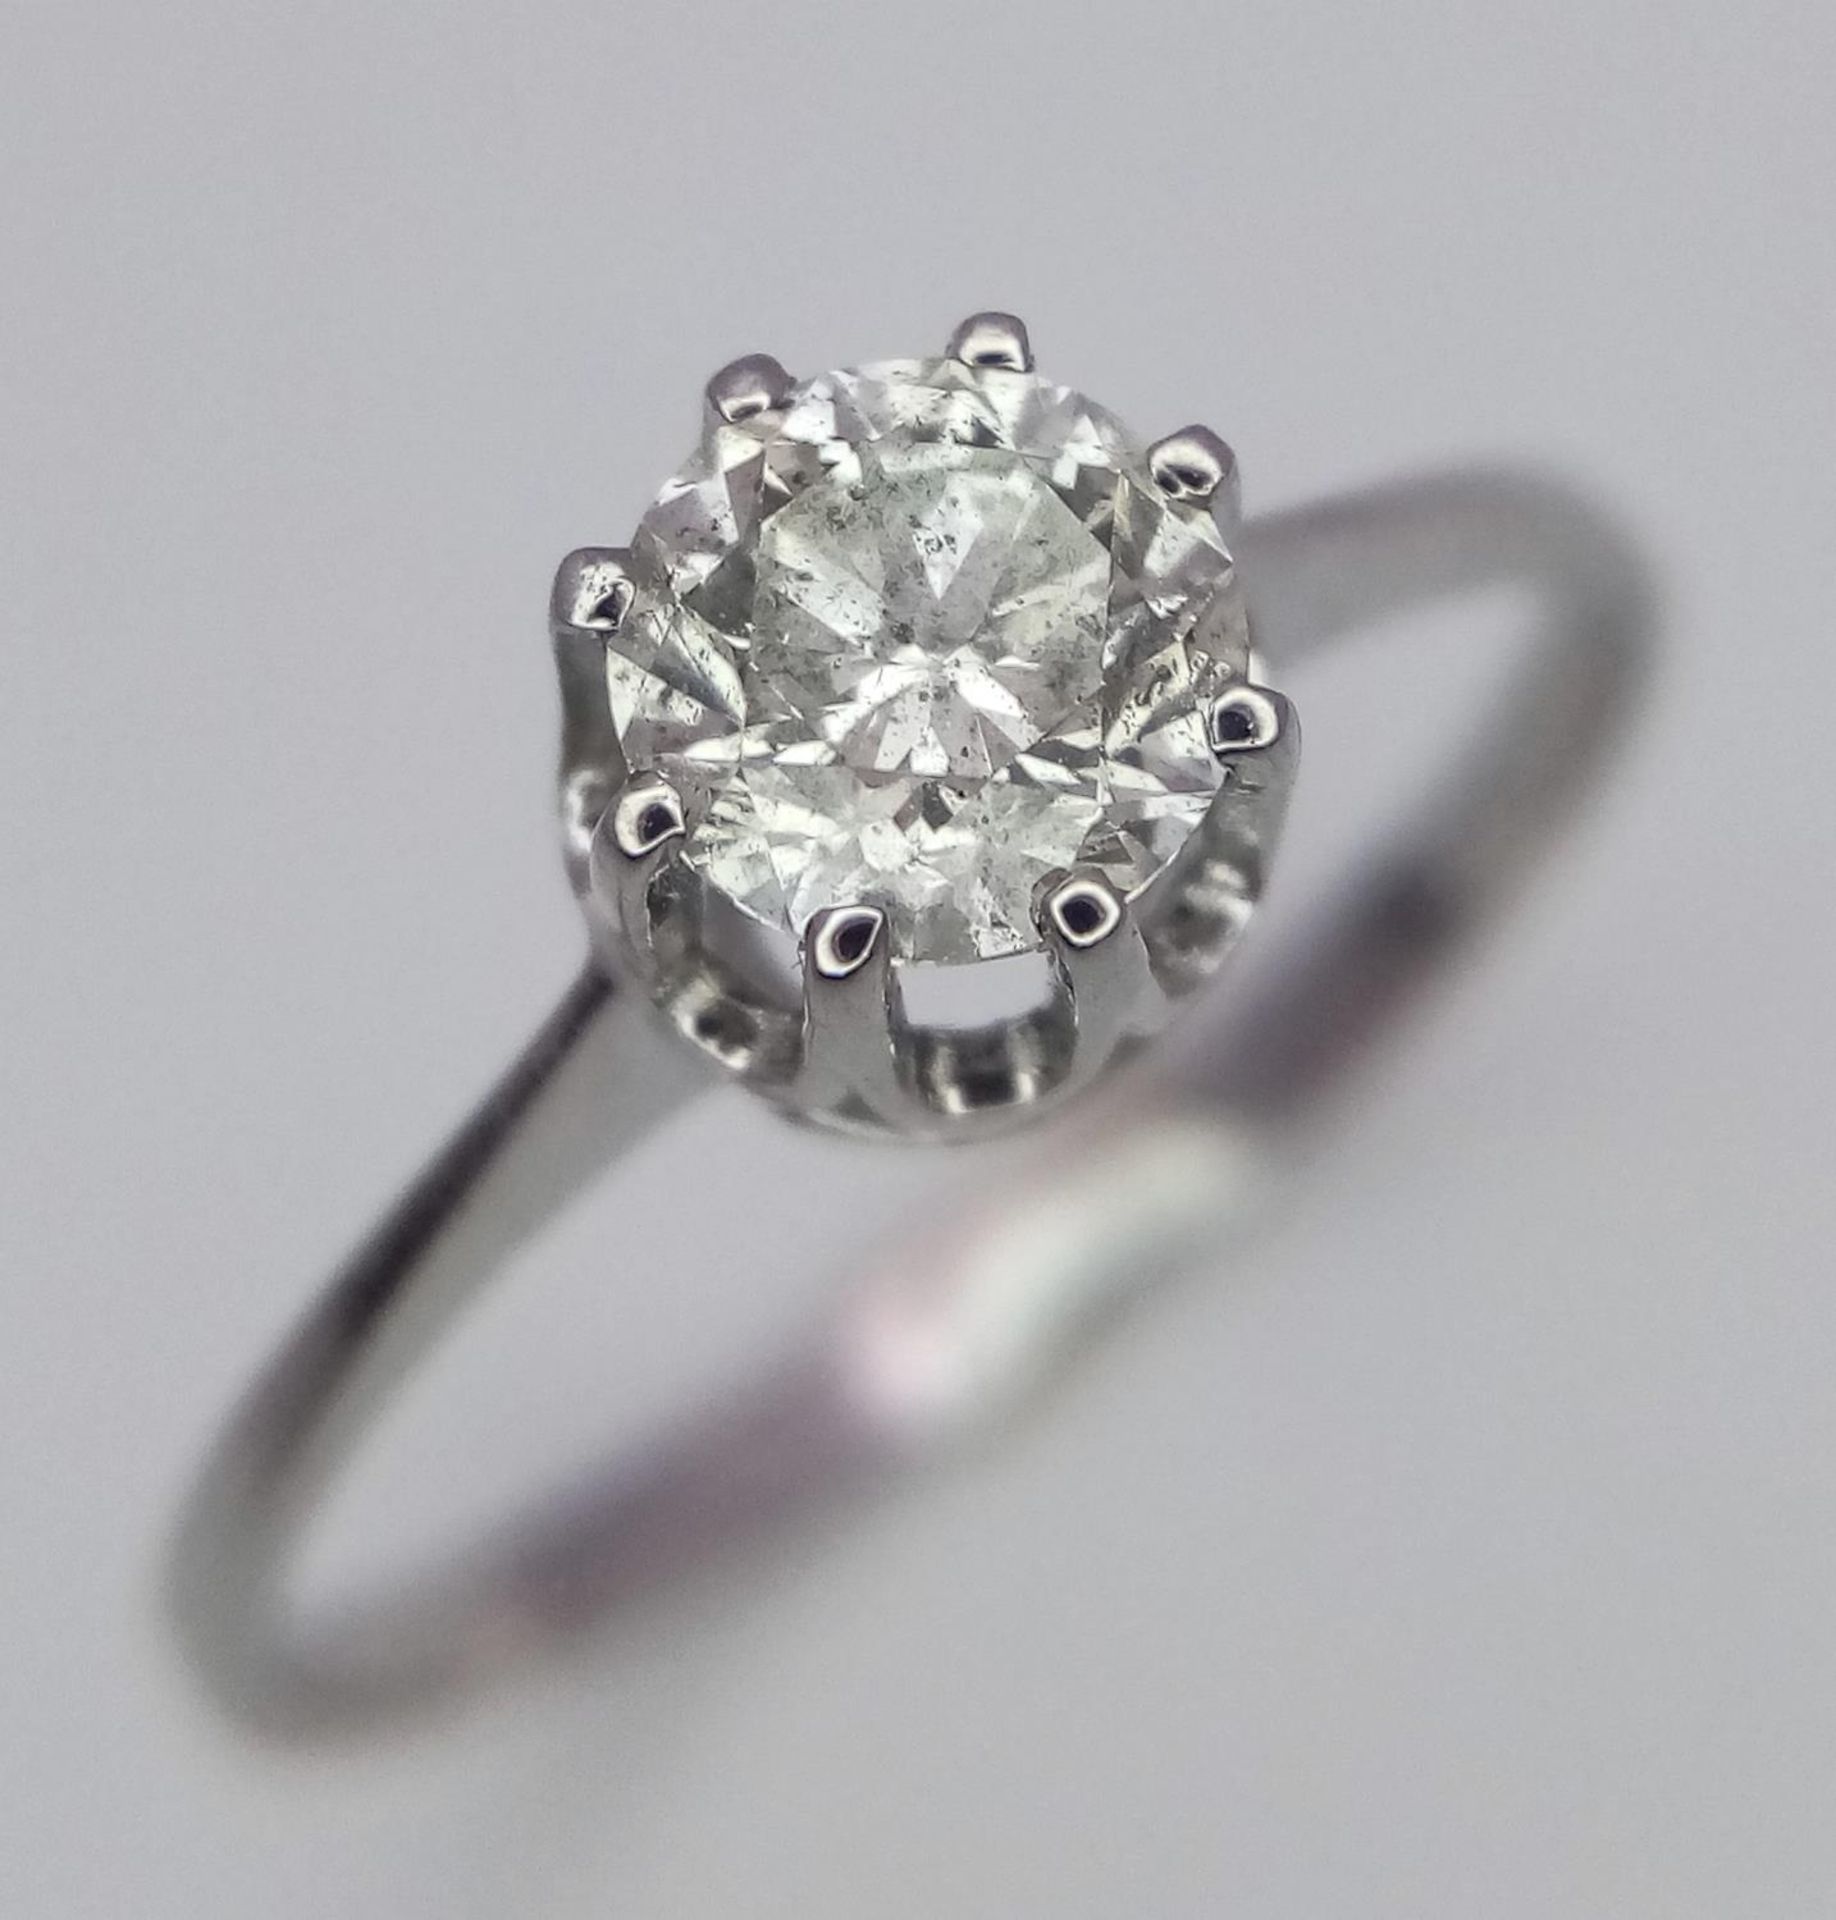 A 14K WHITE GOLD DIAMOND SOLITAIRE RING 0.33CT 1.5G SIZE O/P. BL 9001